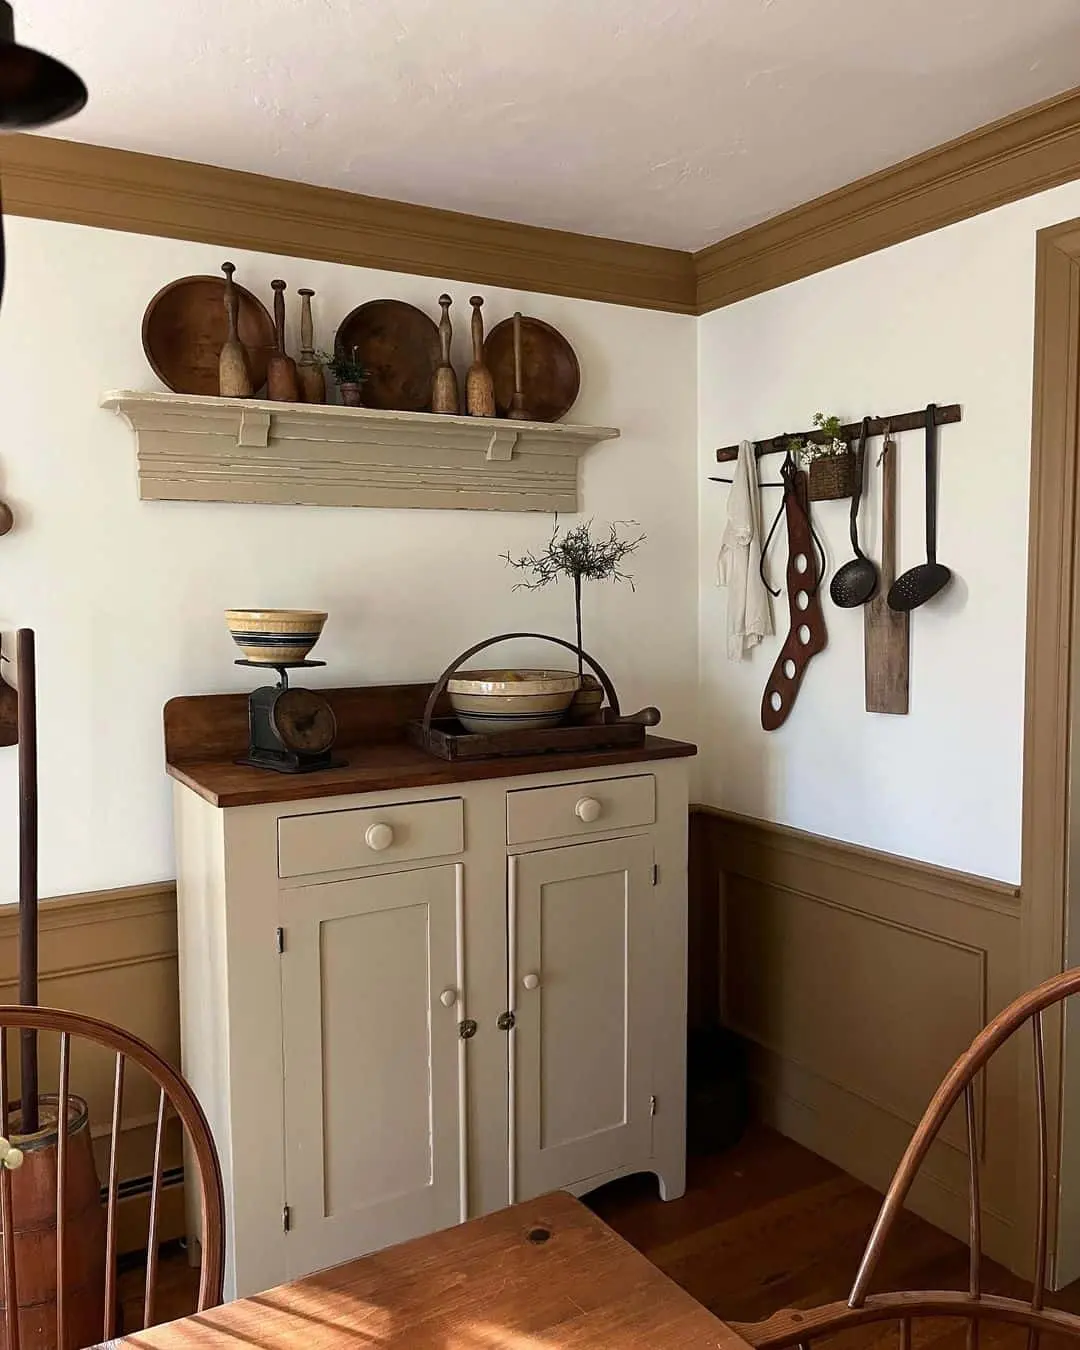 Antique Charm on Freshly Painted Kitchen Walls